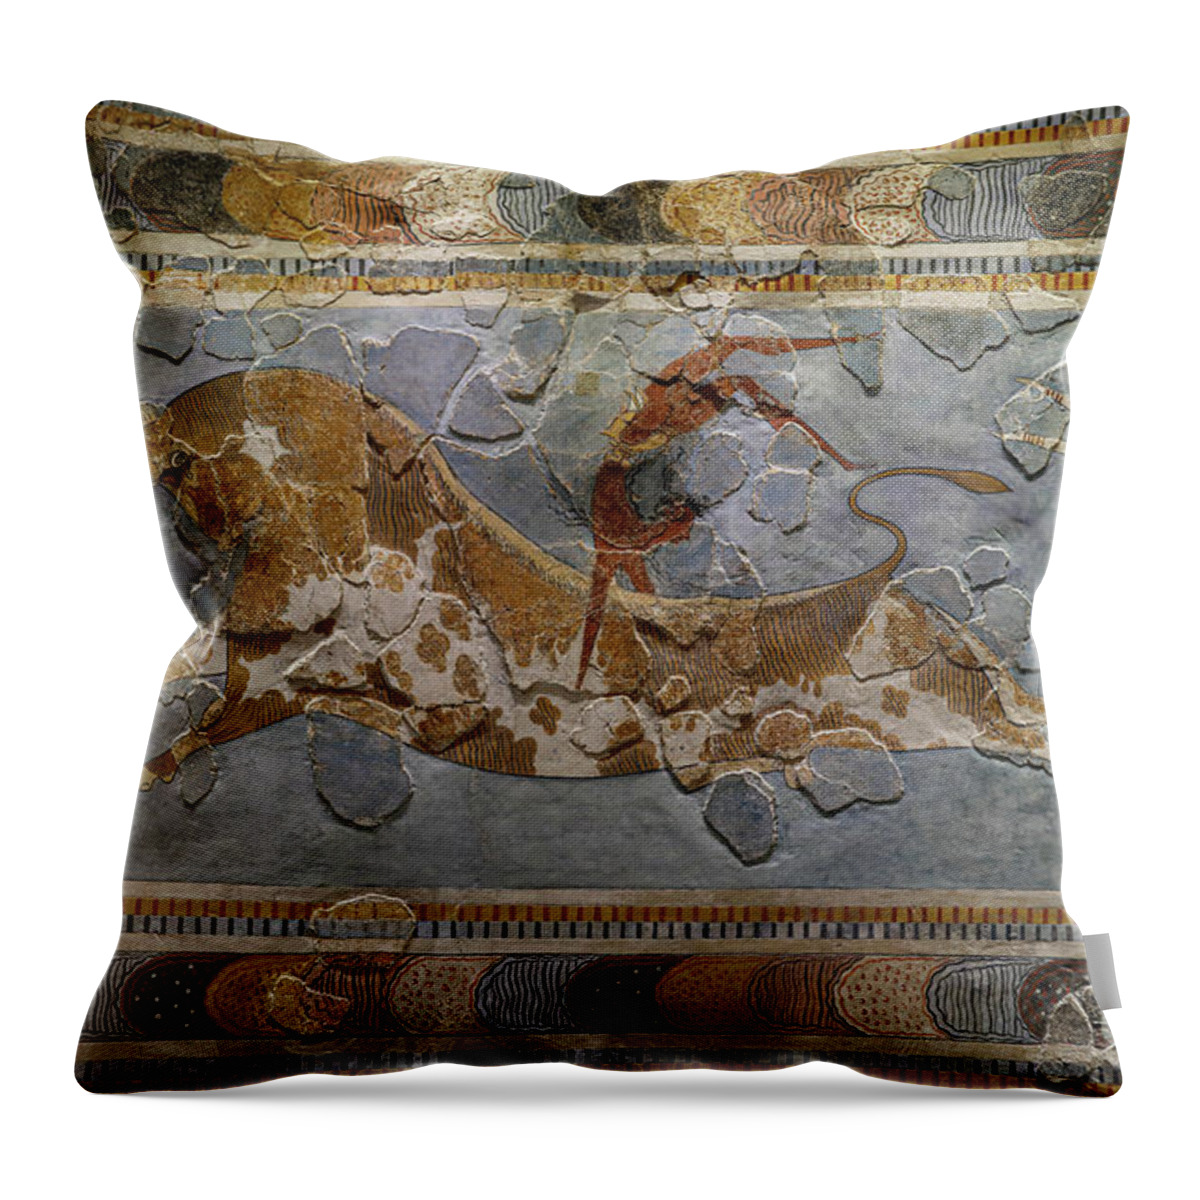 Acrobat Throw Pillow featuring the painting The Bull Leaping Fresco. Found Knossos, 1600-1400 Bc by Minoan